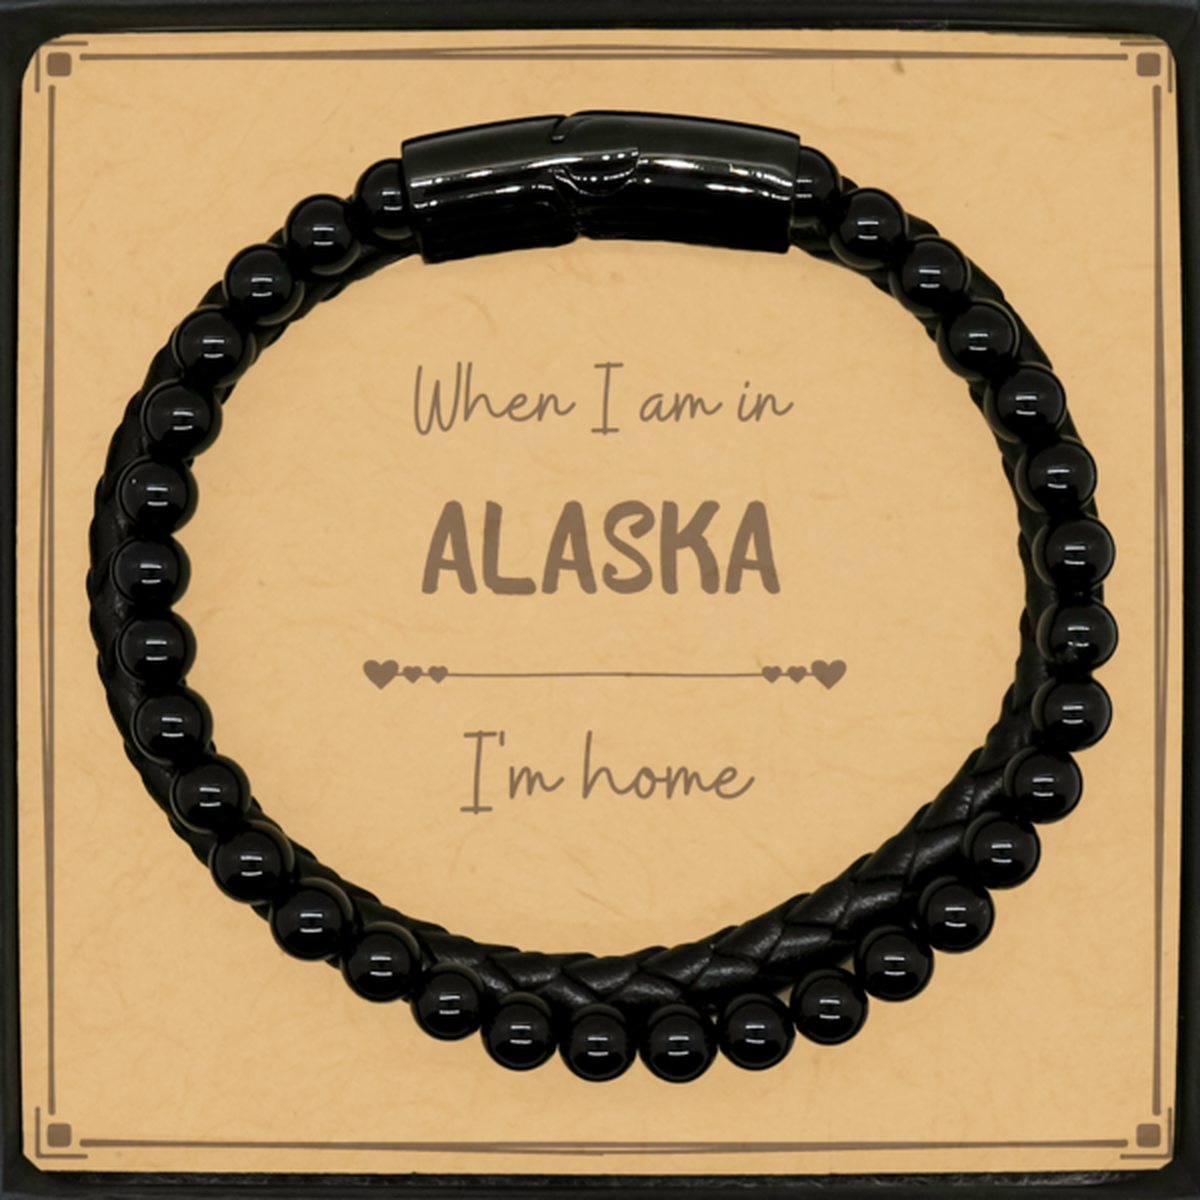 When I am in Alaska I'm home Stone Leather Bracelets, Message Card Gifts For Alaska, State Alaska Birthday Gifts for Friends Coworker